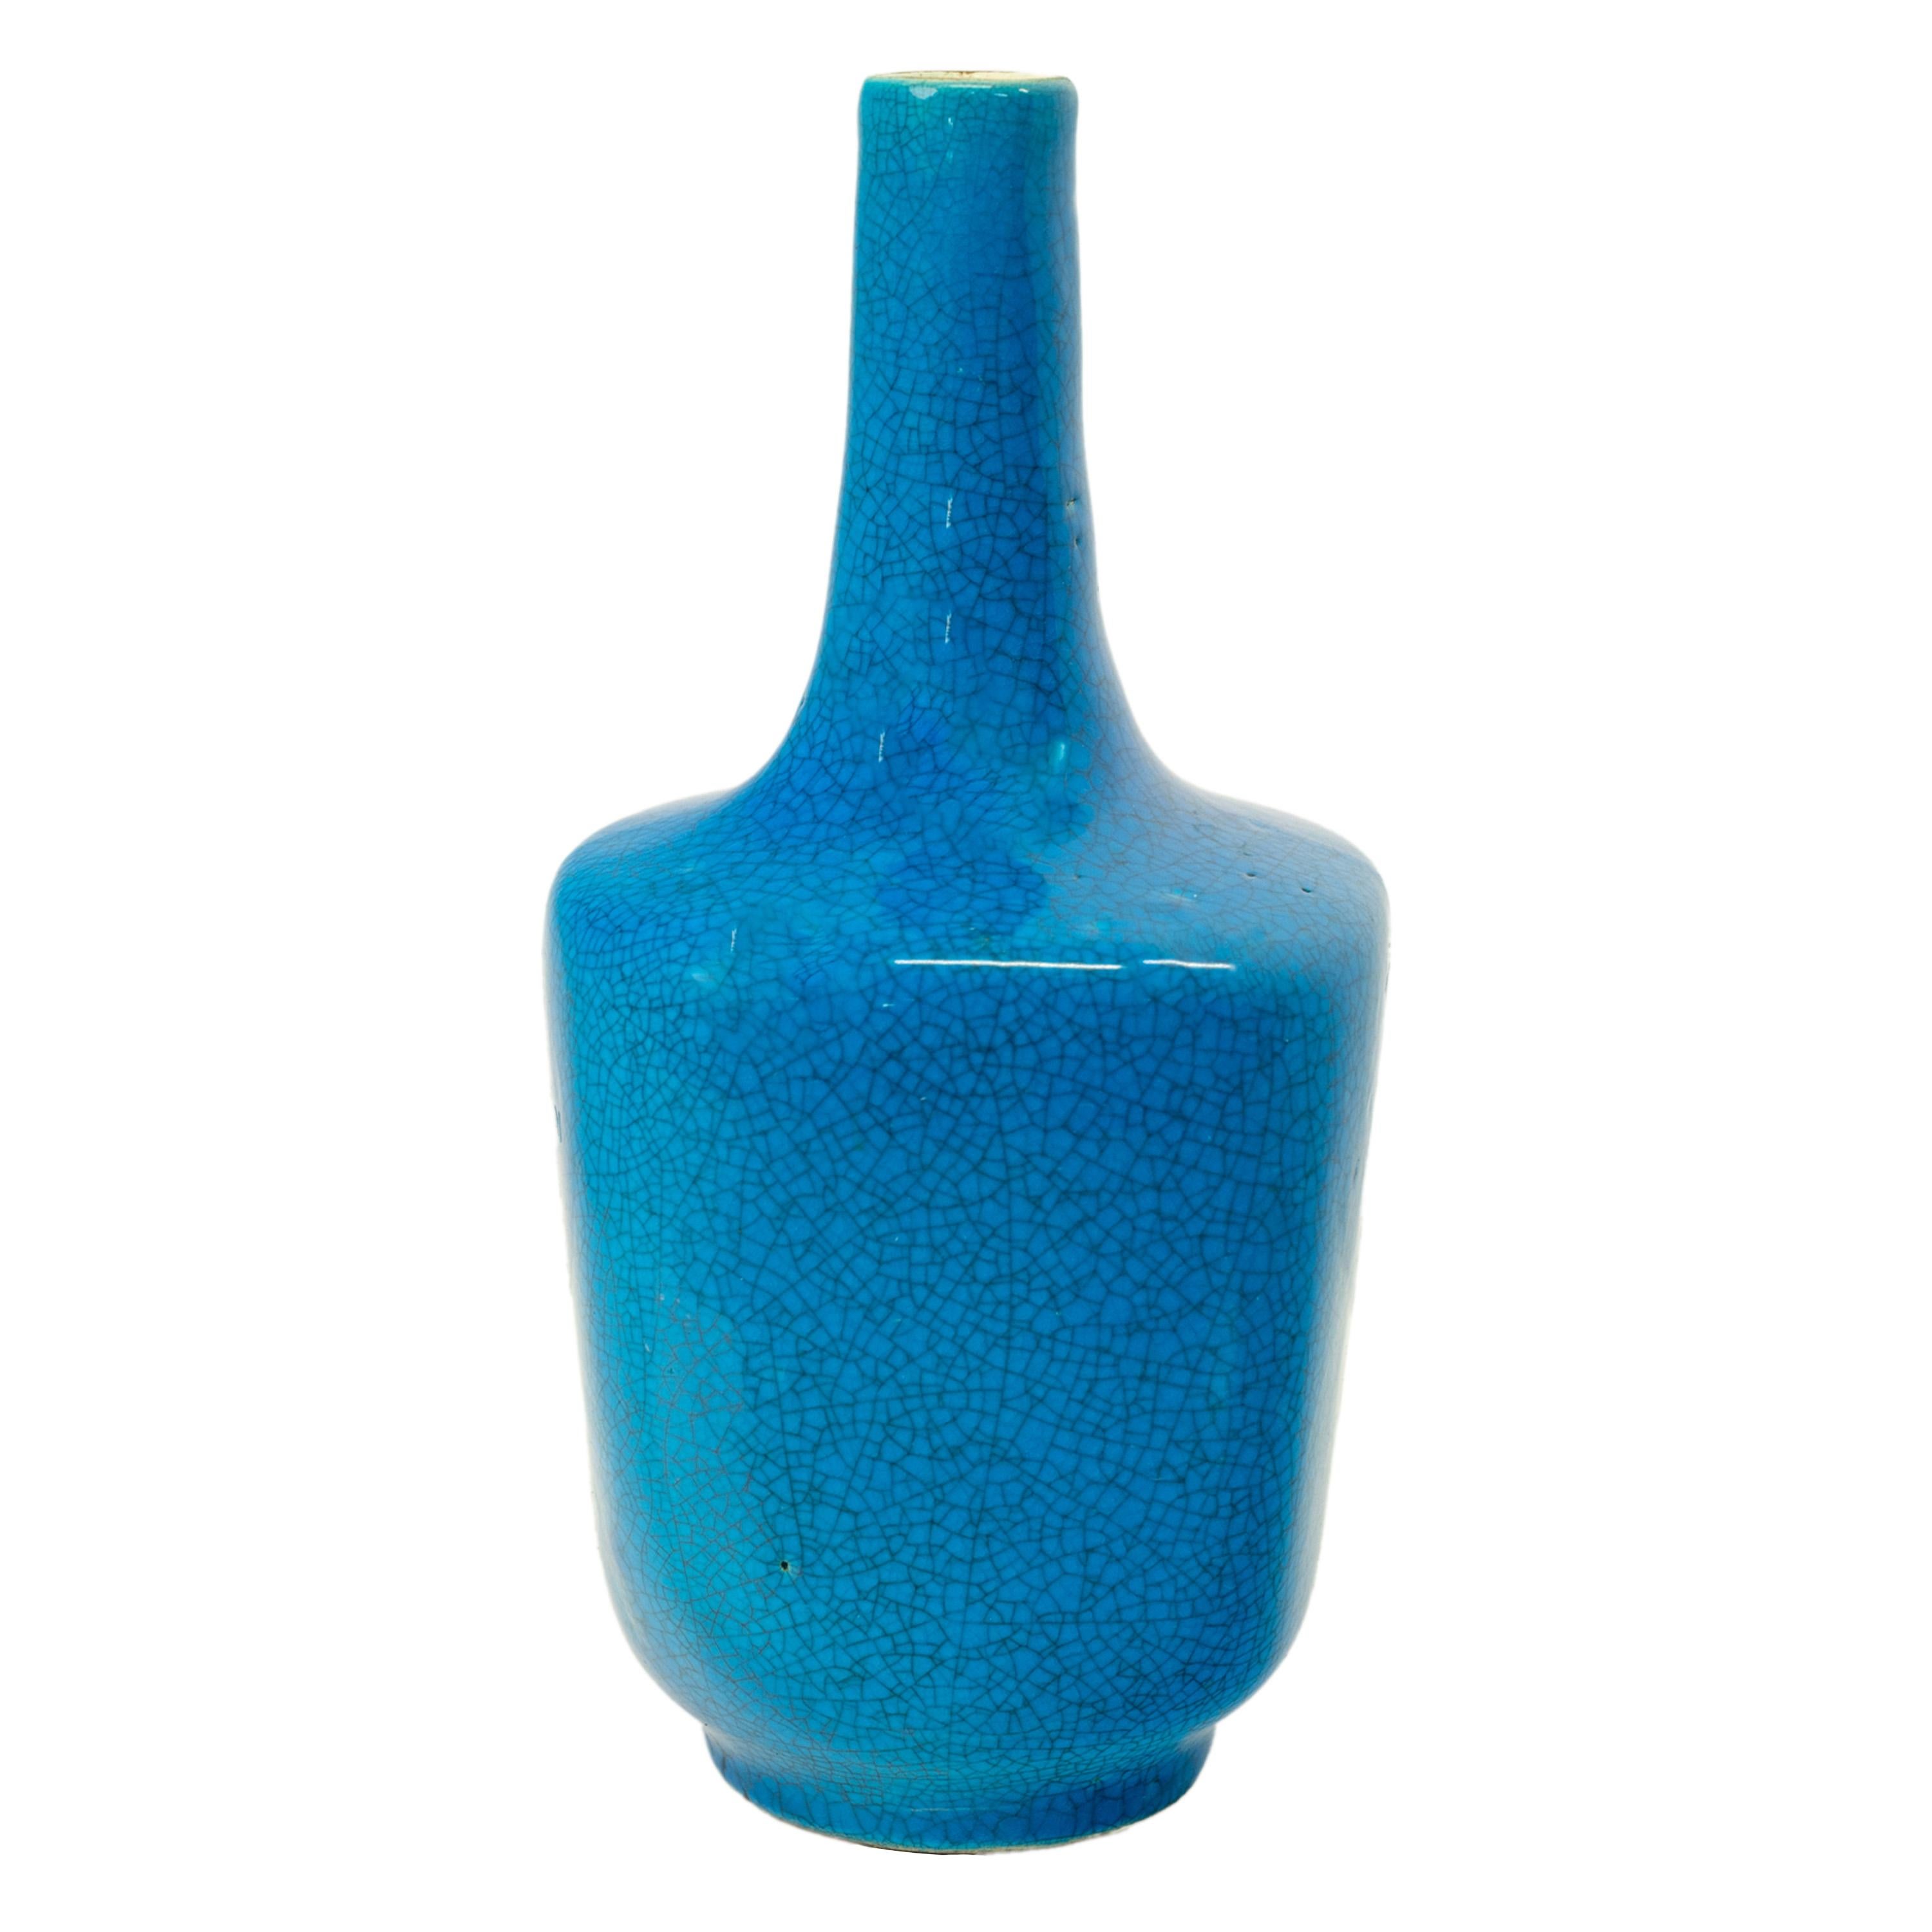 A good antique Art Deco Belgian Blue Pottery crackle glaze vase, Charles Catteau for Boch Freres, circa 1925.
The bottle shaped vase with a 'mallet' shaped base and raised on a shallow circular foot, the vase with a handsome blue crackle glaze and a